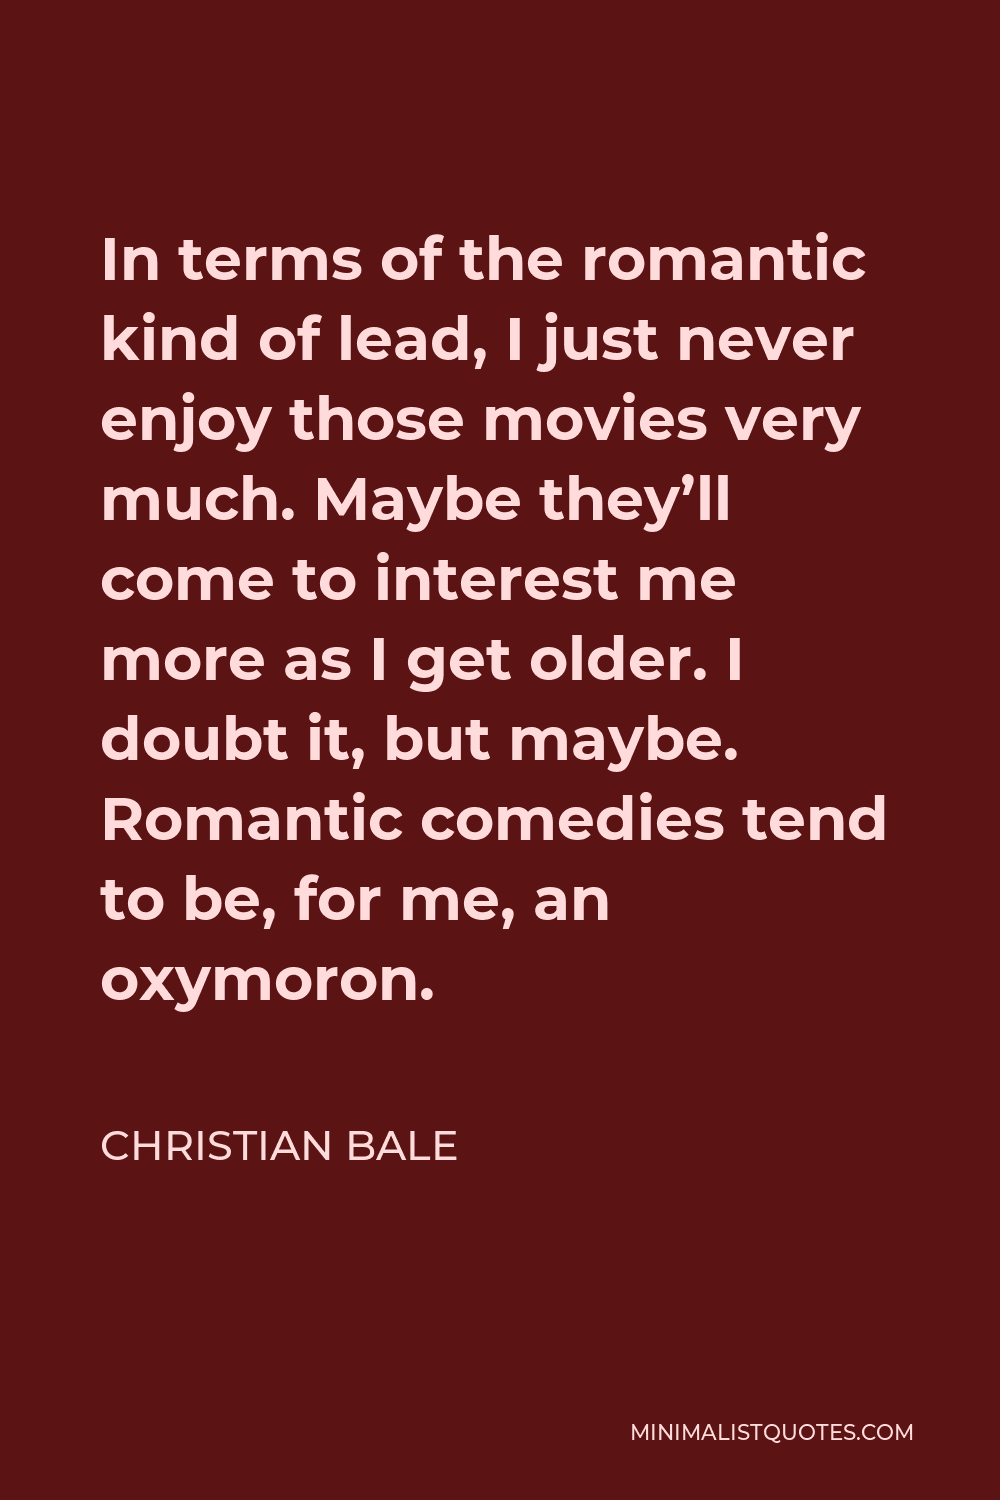 Christian Bale Quote - In terms of the romantic kind of lead, I just never enjoy those movies very much. Maybe they’ll come to interest me more as I get older. I doubt it, but maybe. Romantic comedies tend to be, for me, an oxymoron.